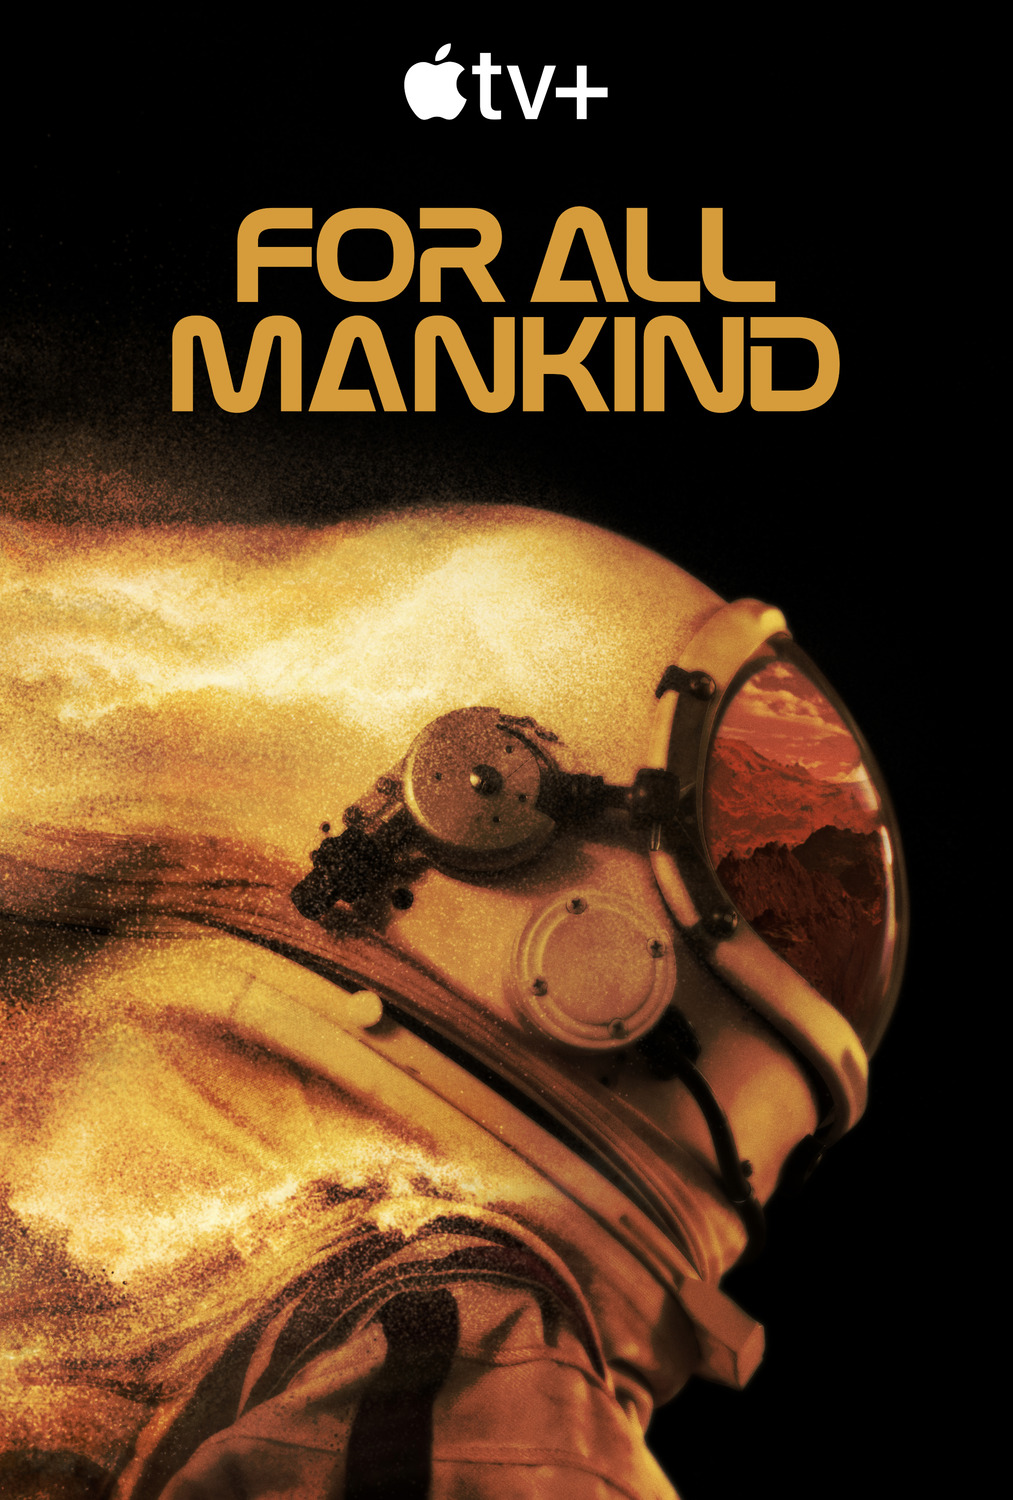 Extra Large TV Poster Image for For All Mankind (#6 of 7)